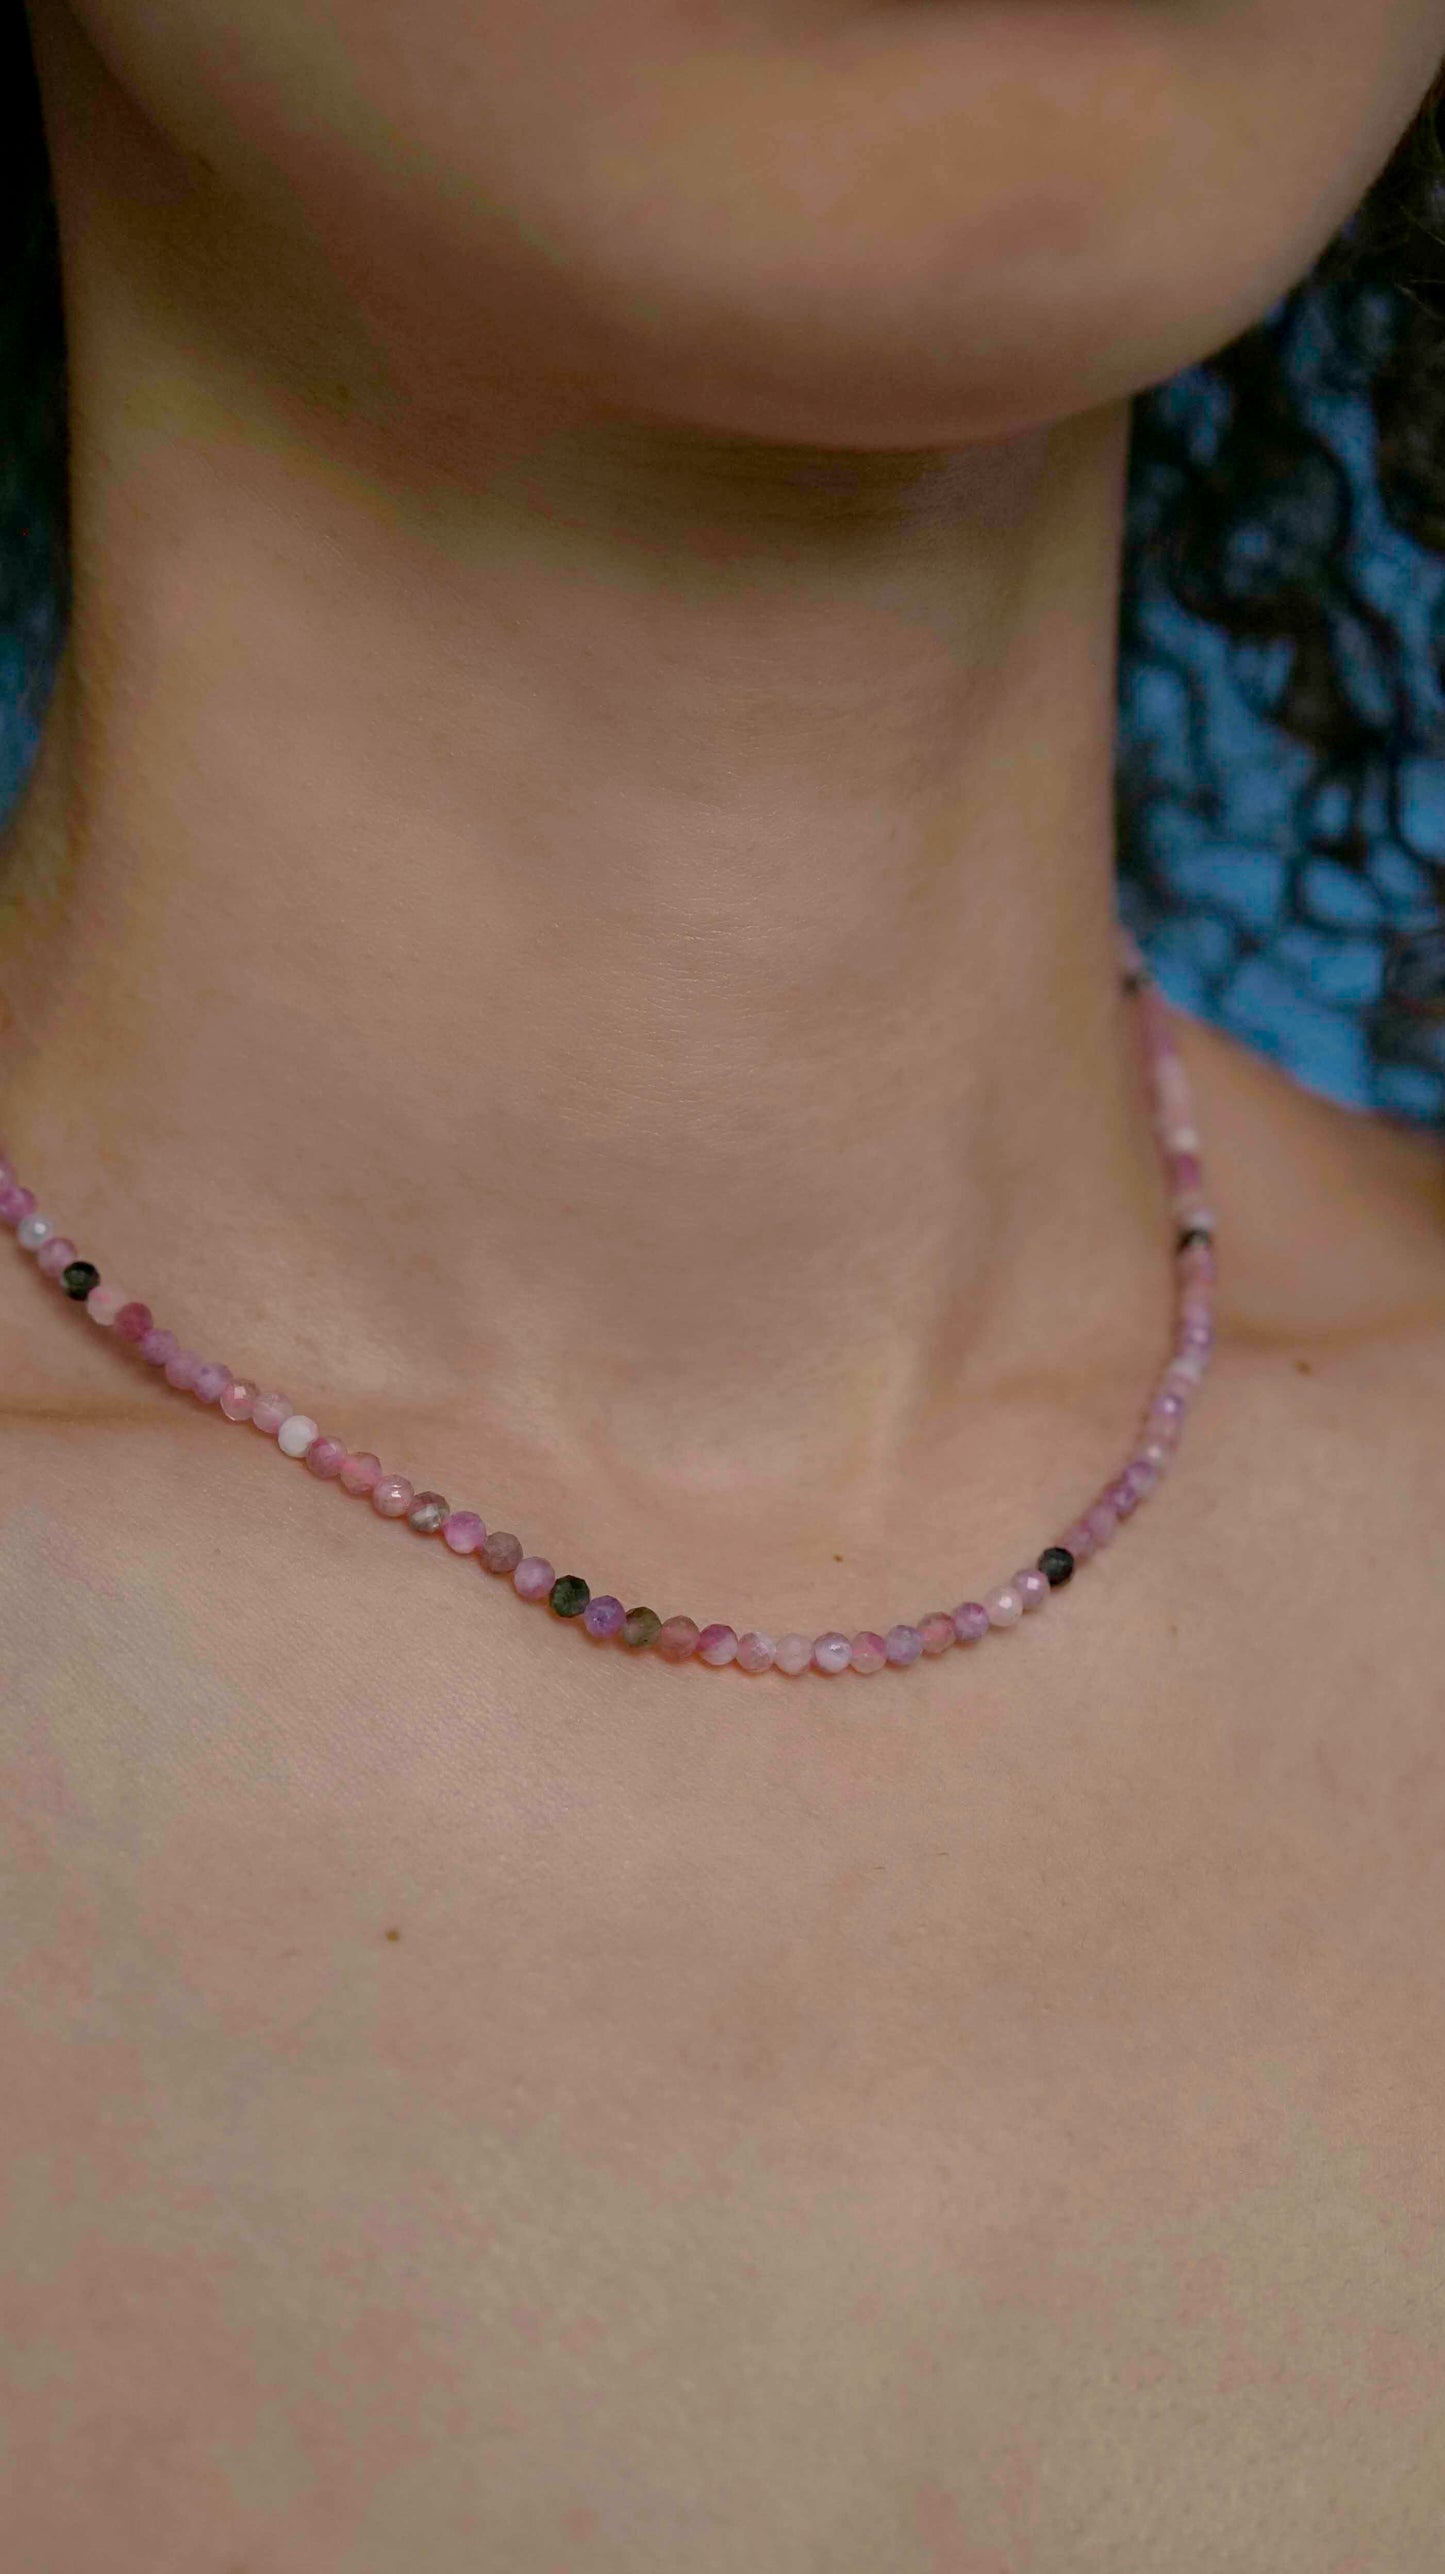 Handmade beaded pink tourmaline stone necklace with a sterling silver clasp.